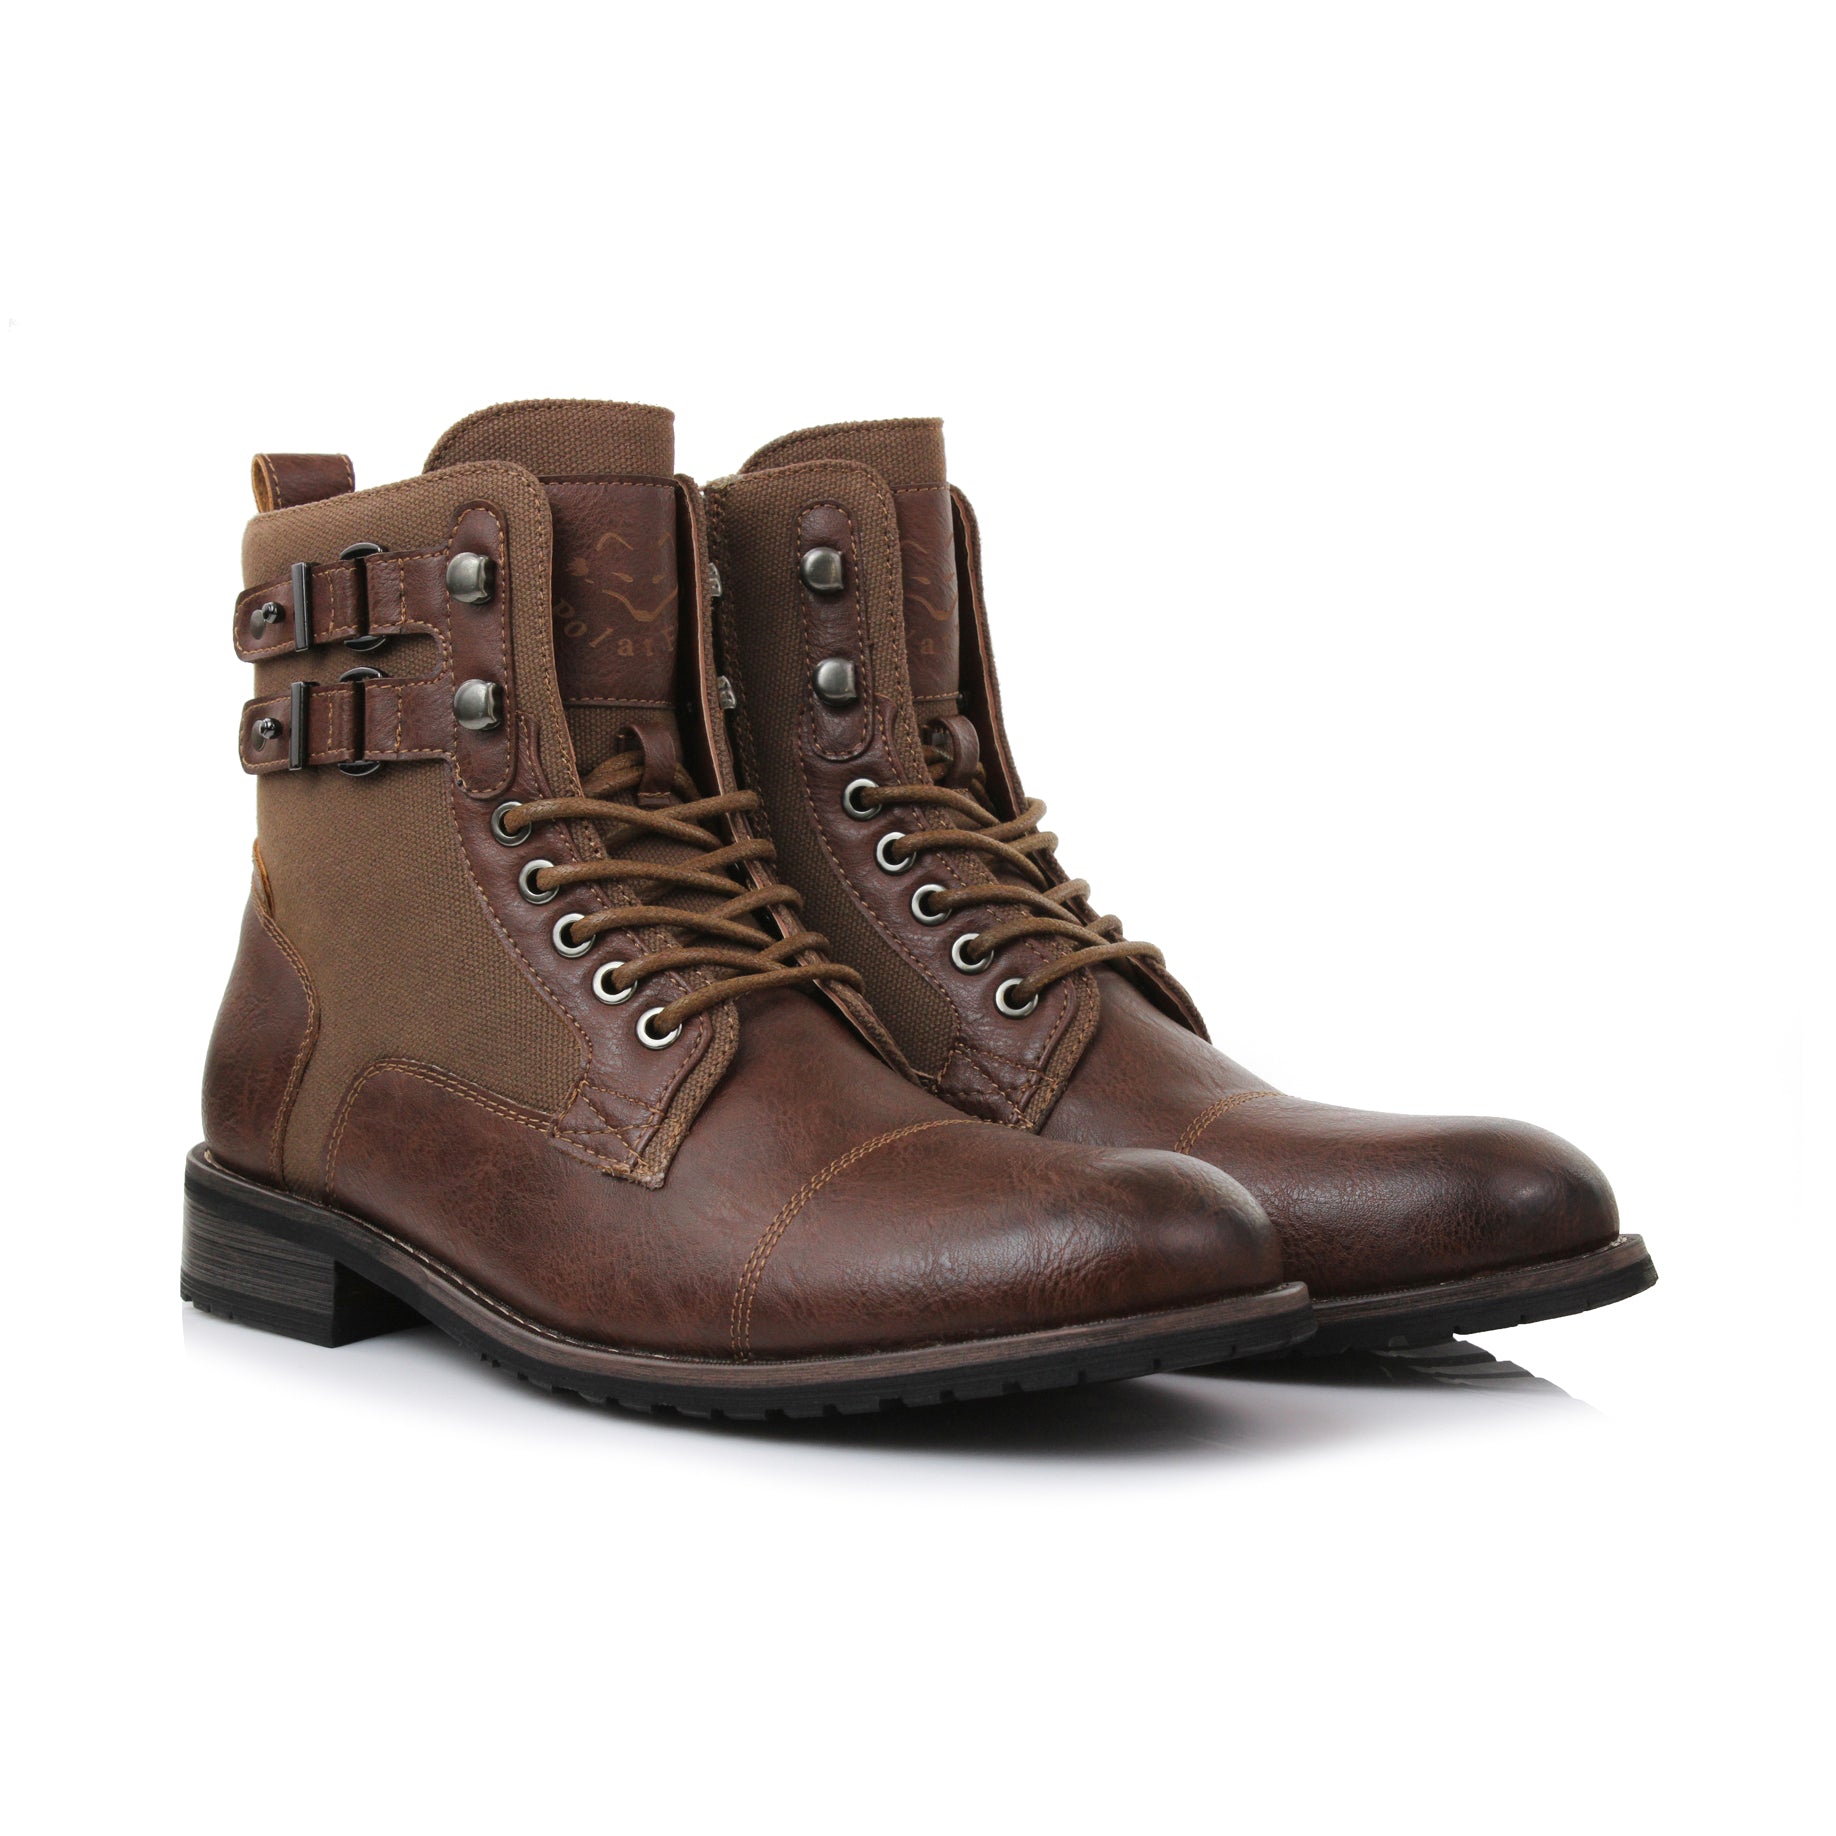 Duo-Textured Combat Boots | Mitch by Polar Fox | Conal Footwear | Paired Angle View